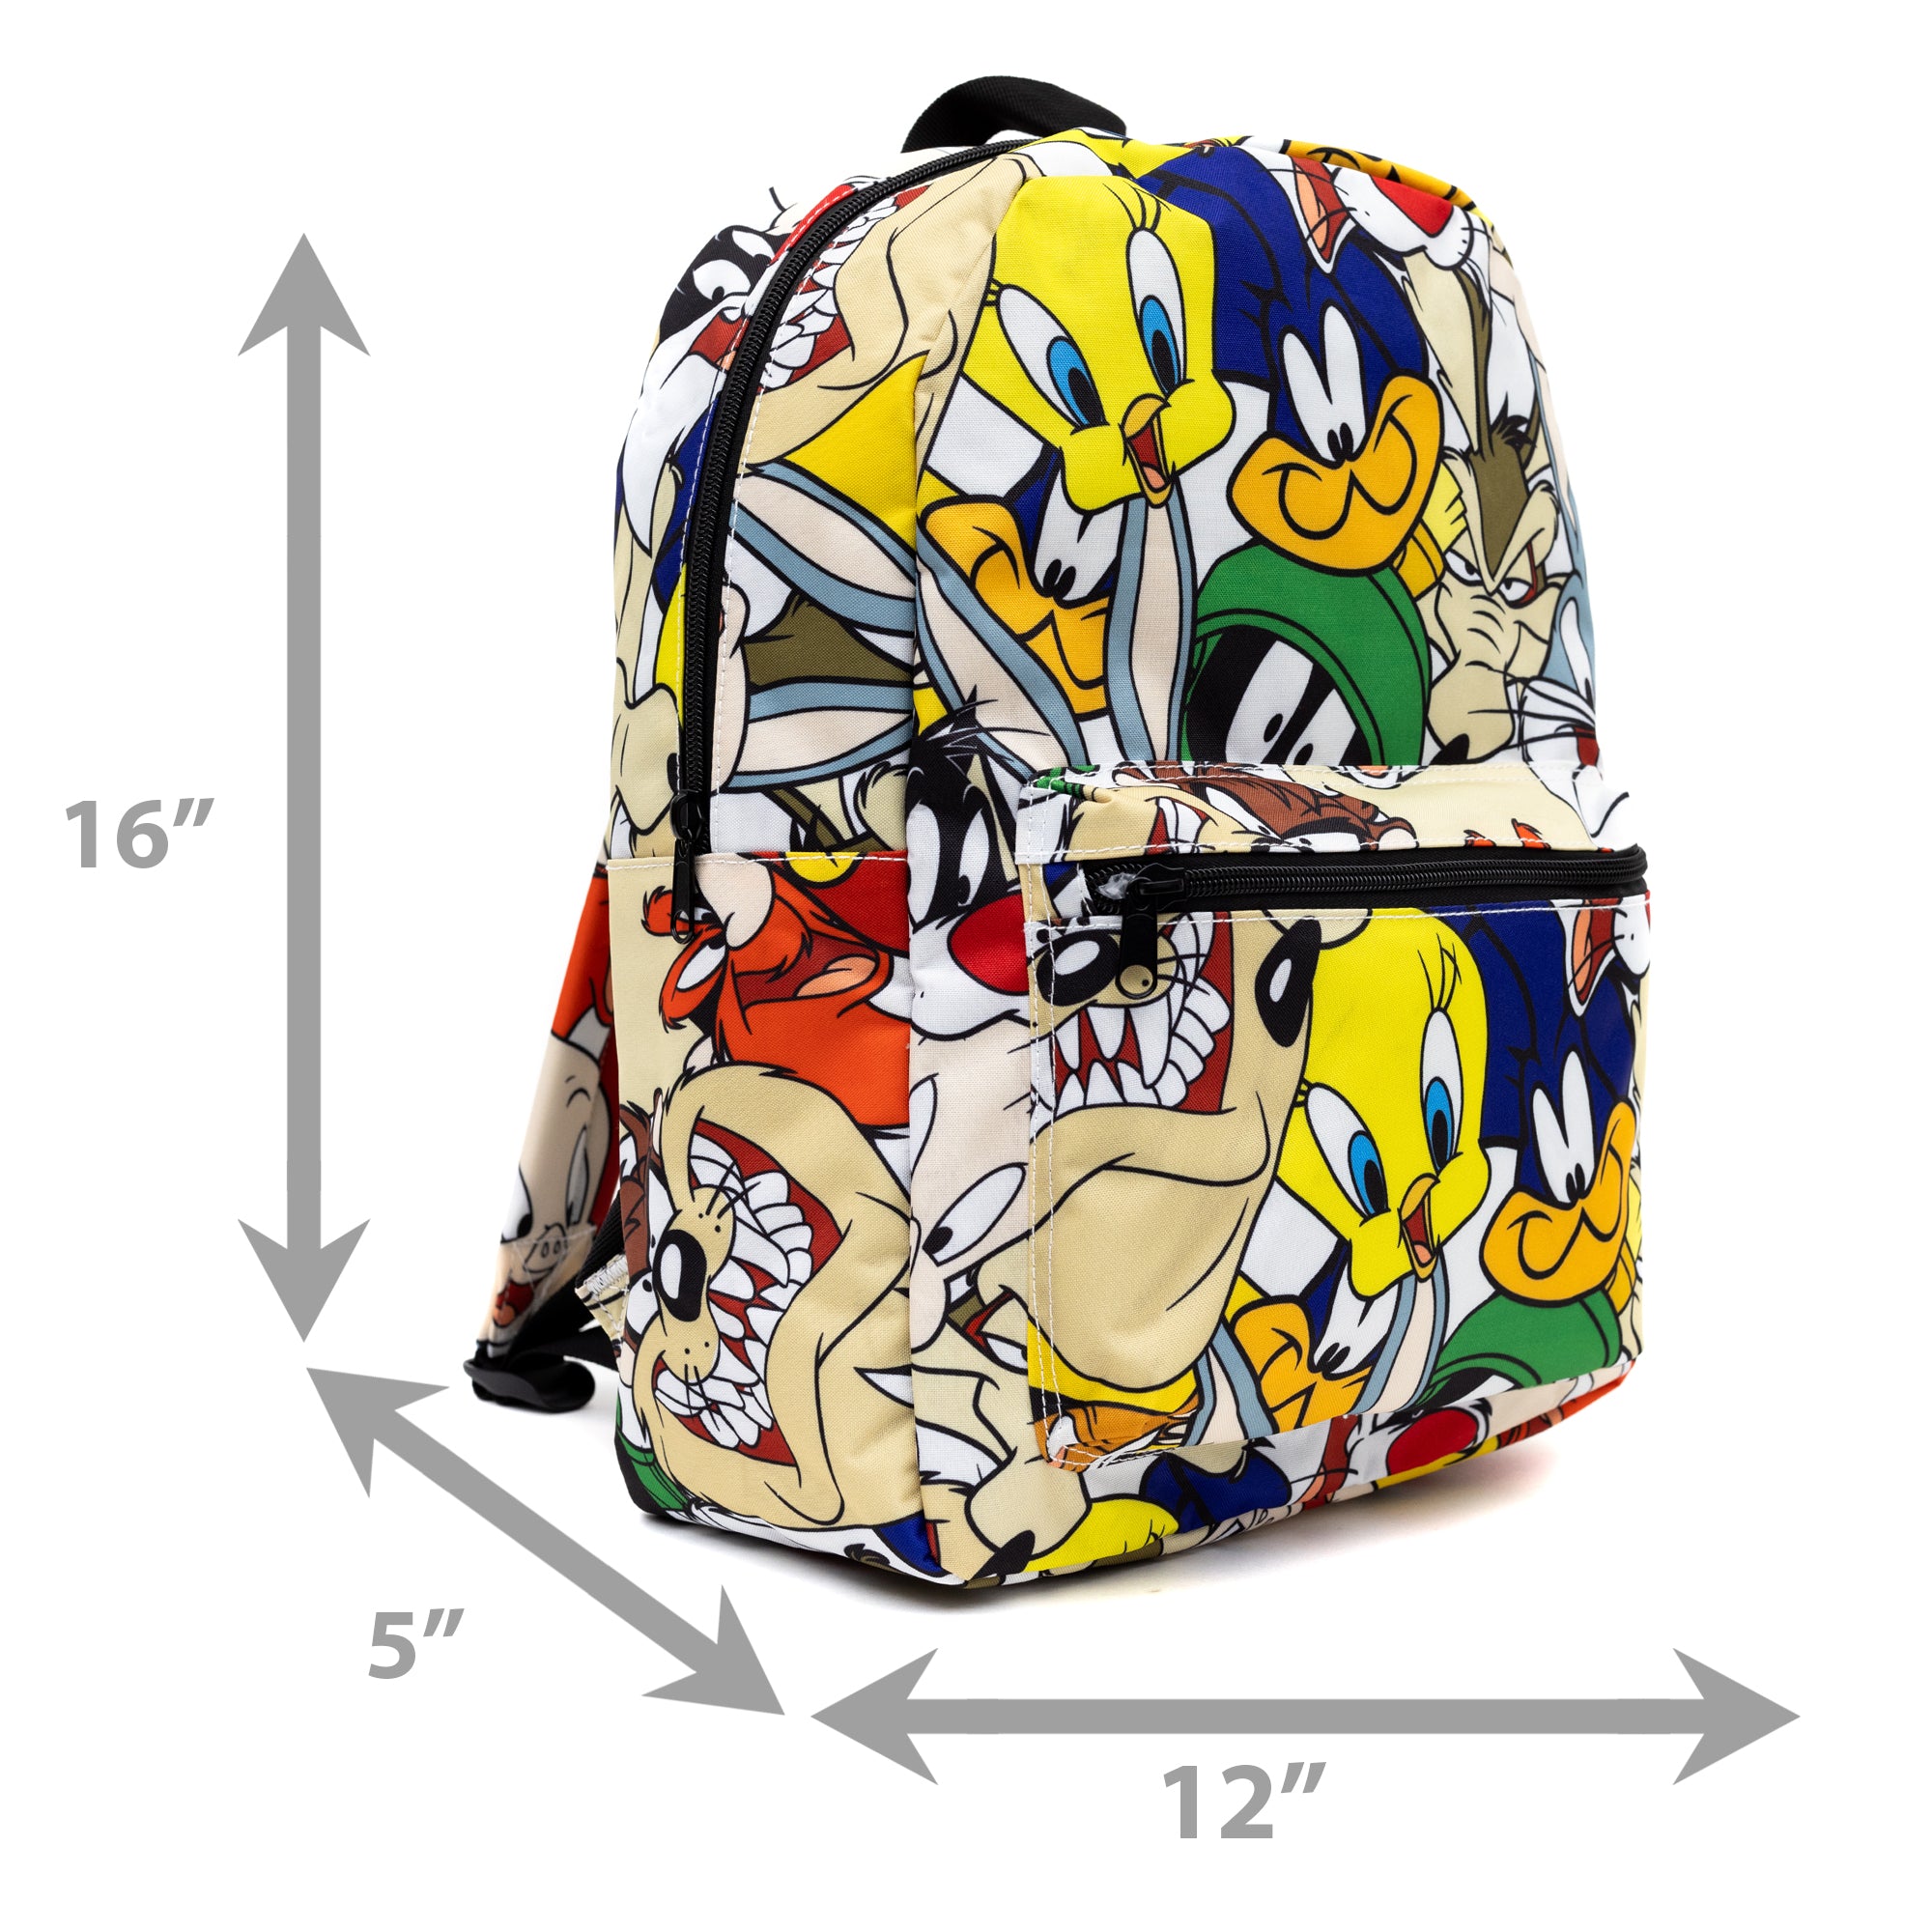 The Looney Tunes Full Size Nylon Backpack